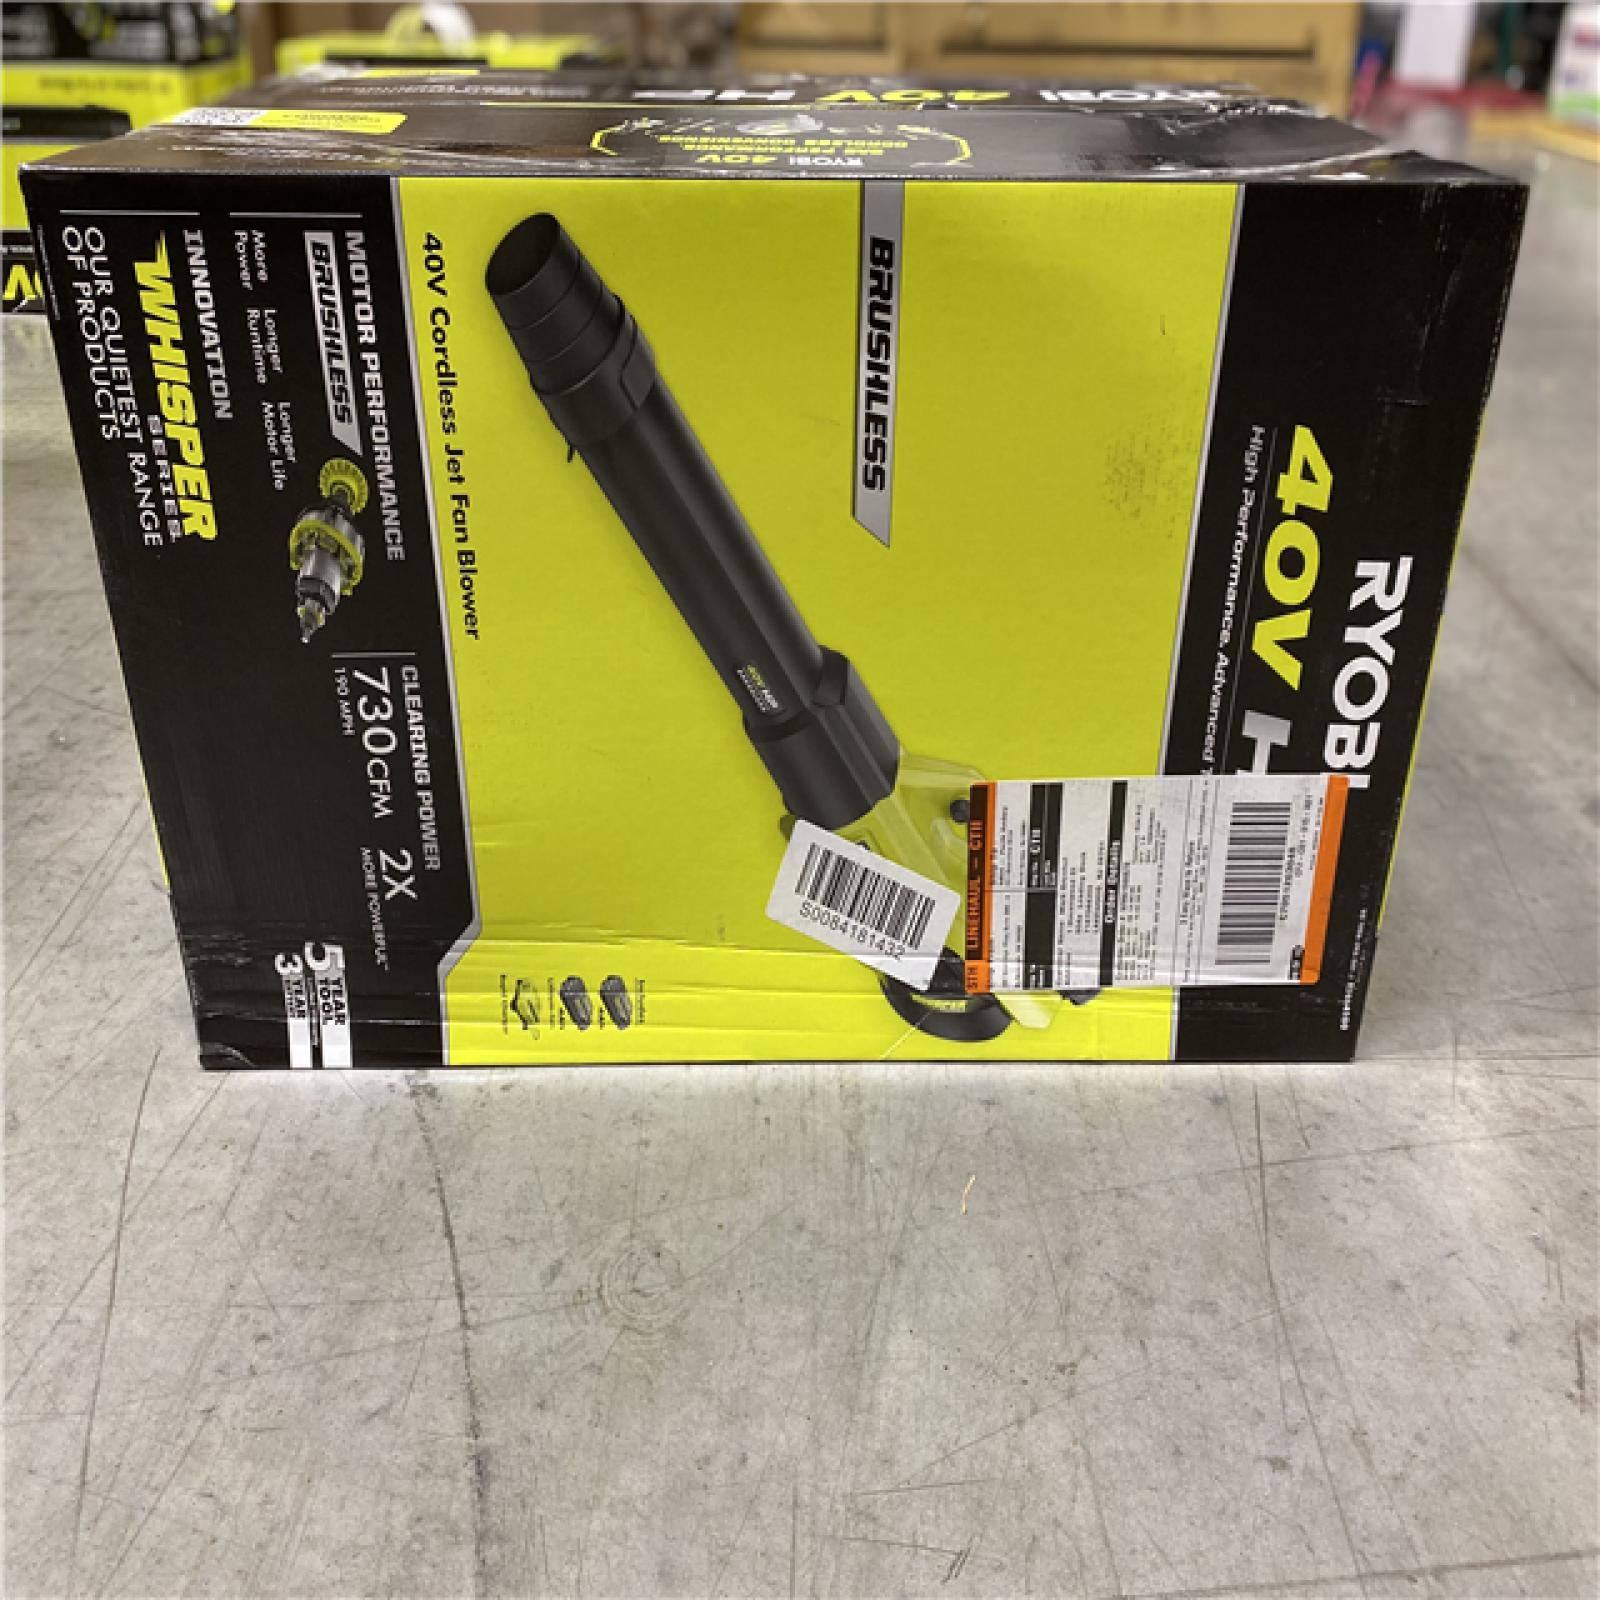 DALLAS LOCATION - New  (2 UNITS)RYOBI 40V HP Brushless Whisper Series 190 MPH 730 CFM Cordless Battery Jet Fan Leaf Blower with (2) 4.0 Ah Batteries & Charger